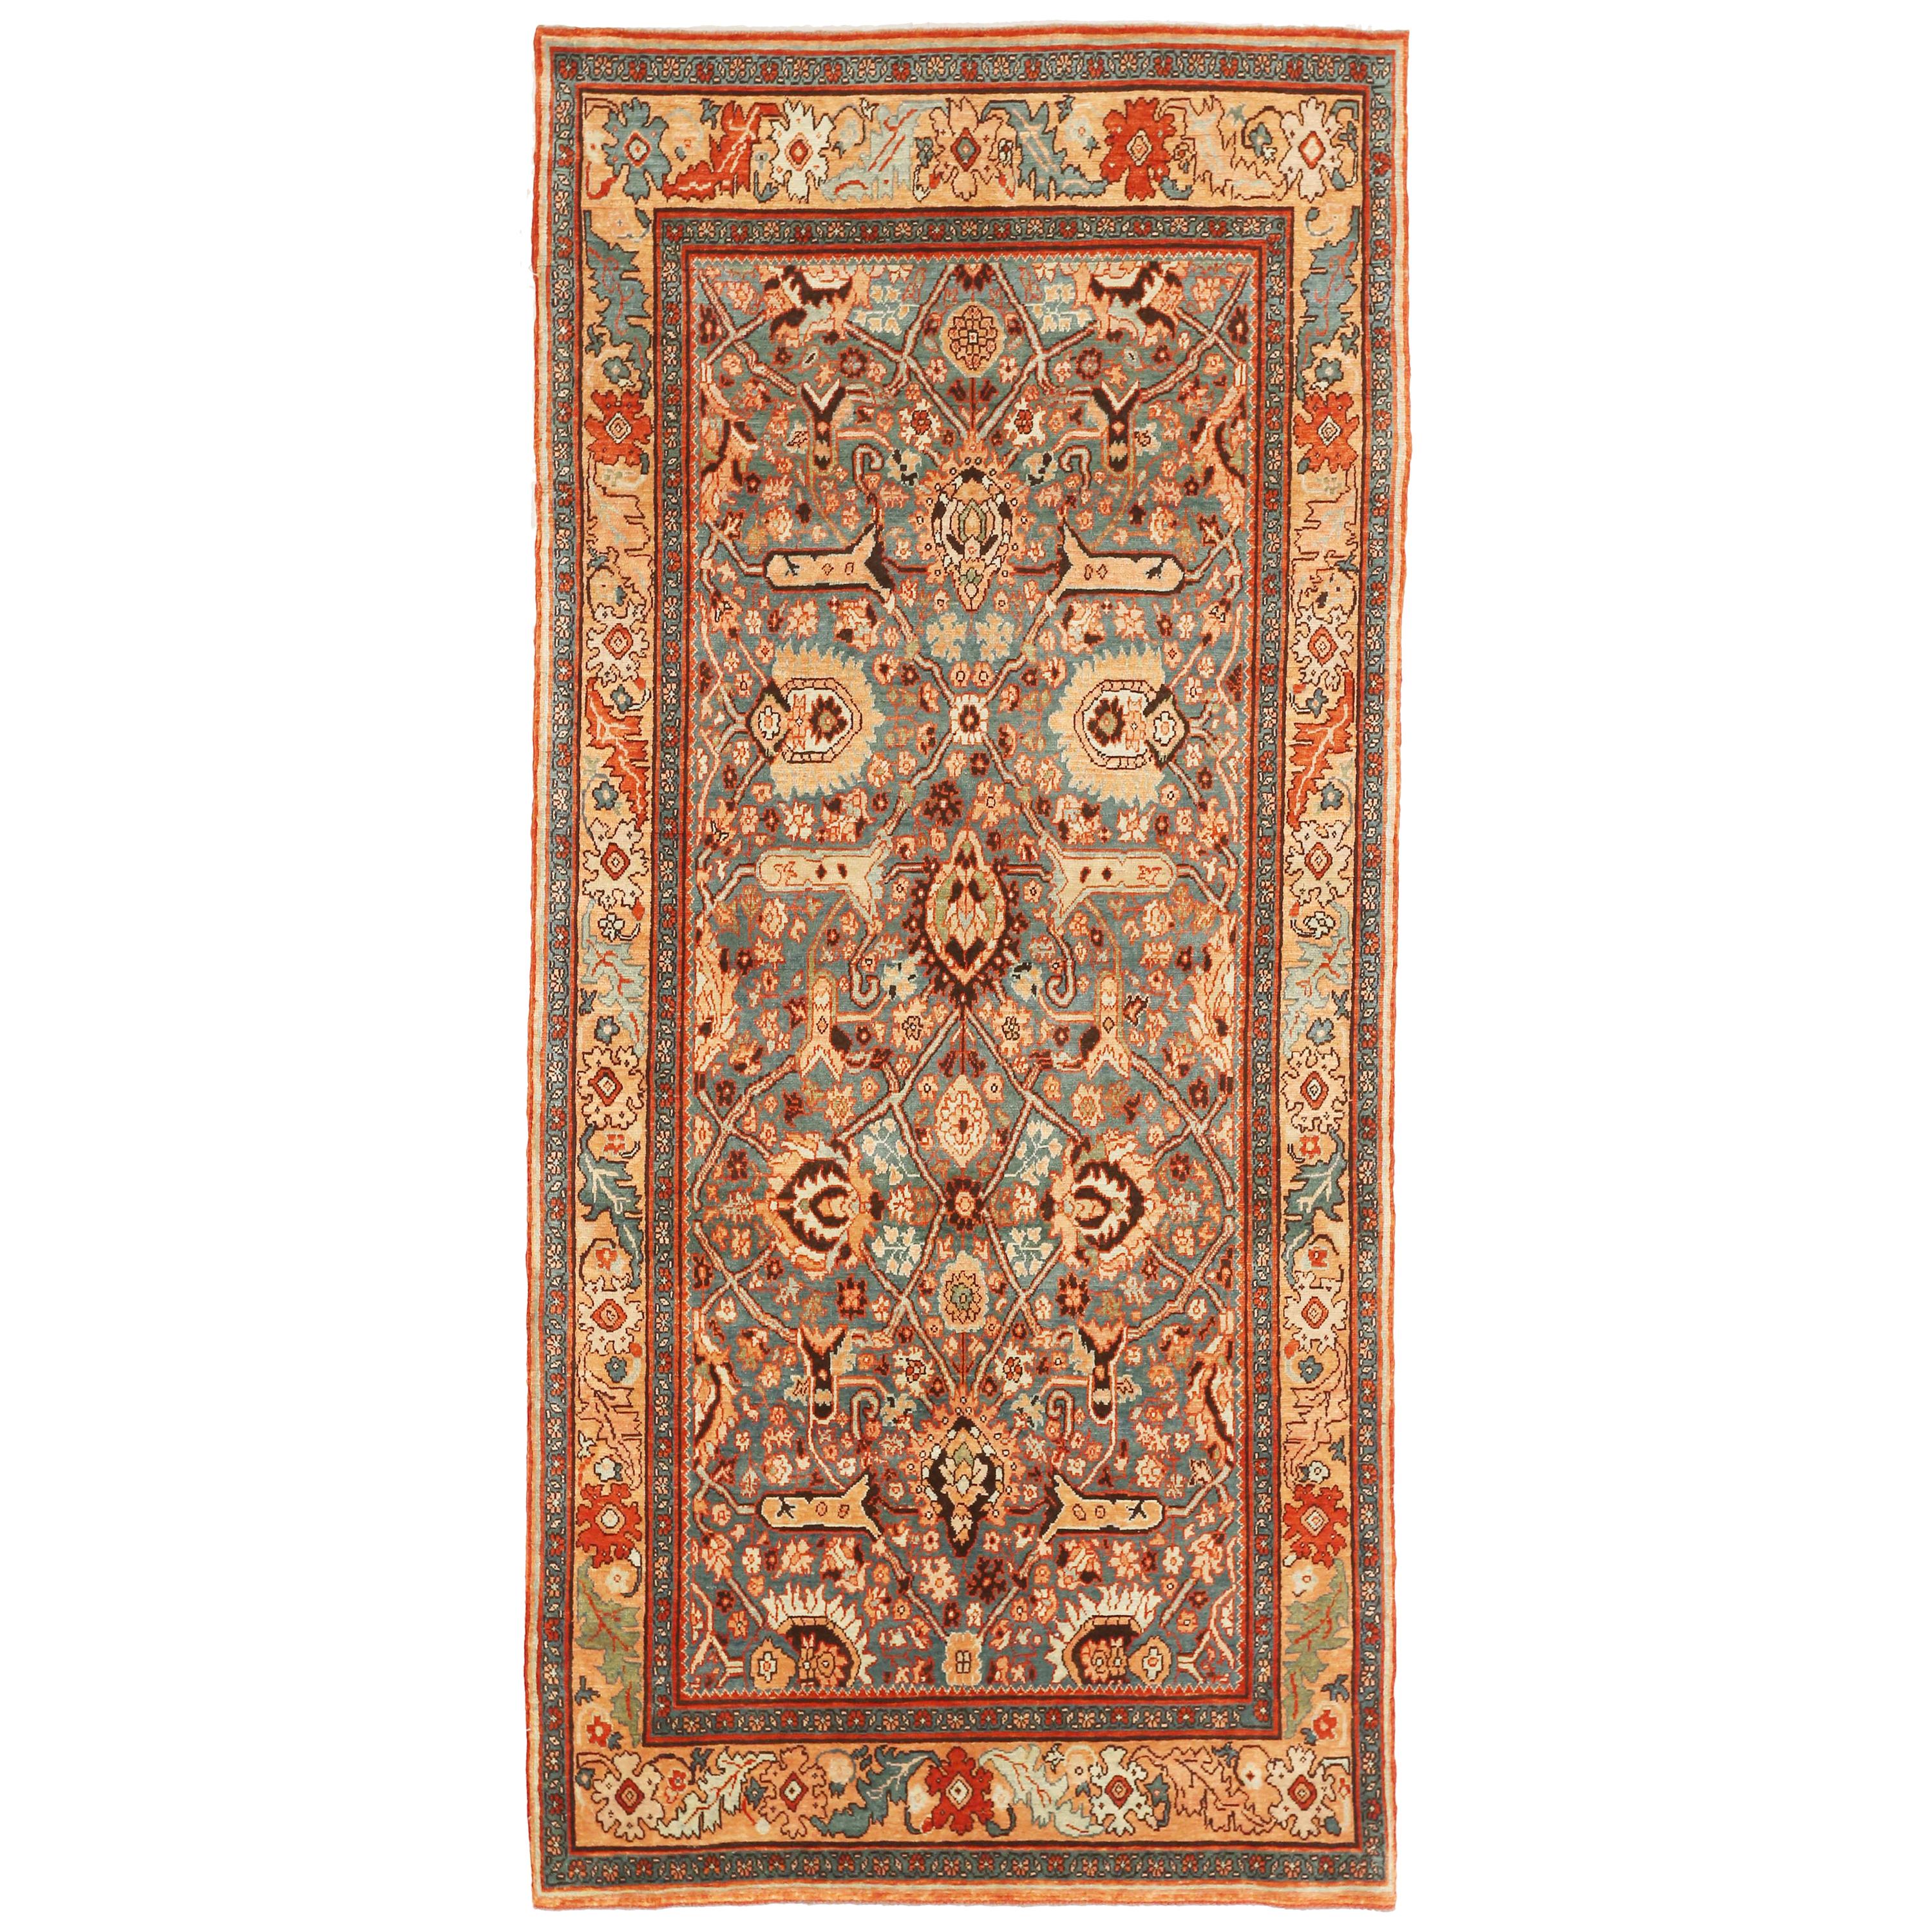  Antique Turkish Bijar Rug with Red & Black Allover Floral Motifs on Gray Field For Sale